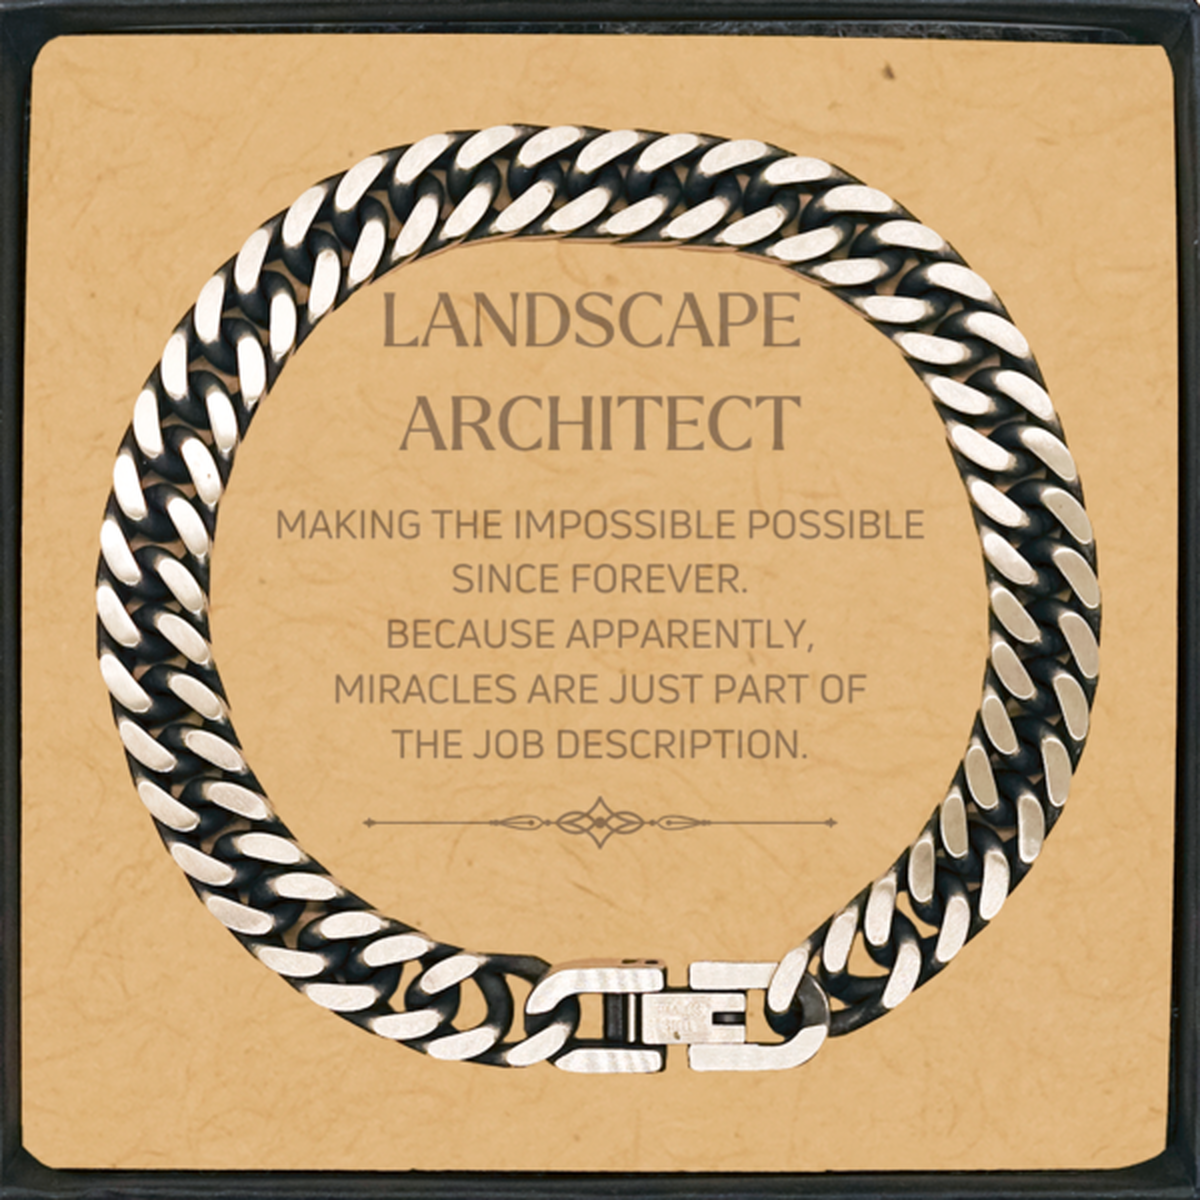 Funny Landscape Architect Gifts, Miracles are just part of the job description, Inspirational Birthday Cuban Link Chain Bracelet For Landscape Architect, Men, Women, Coworkers, Friends, Boss